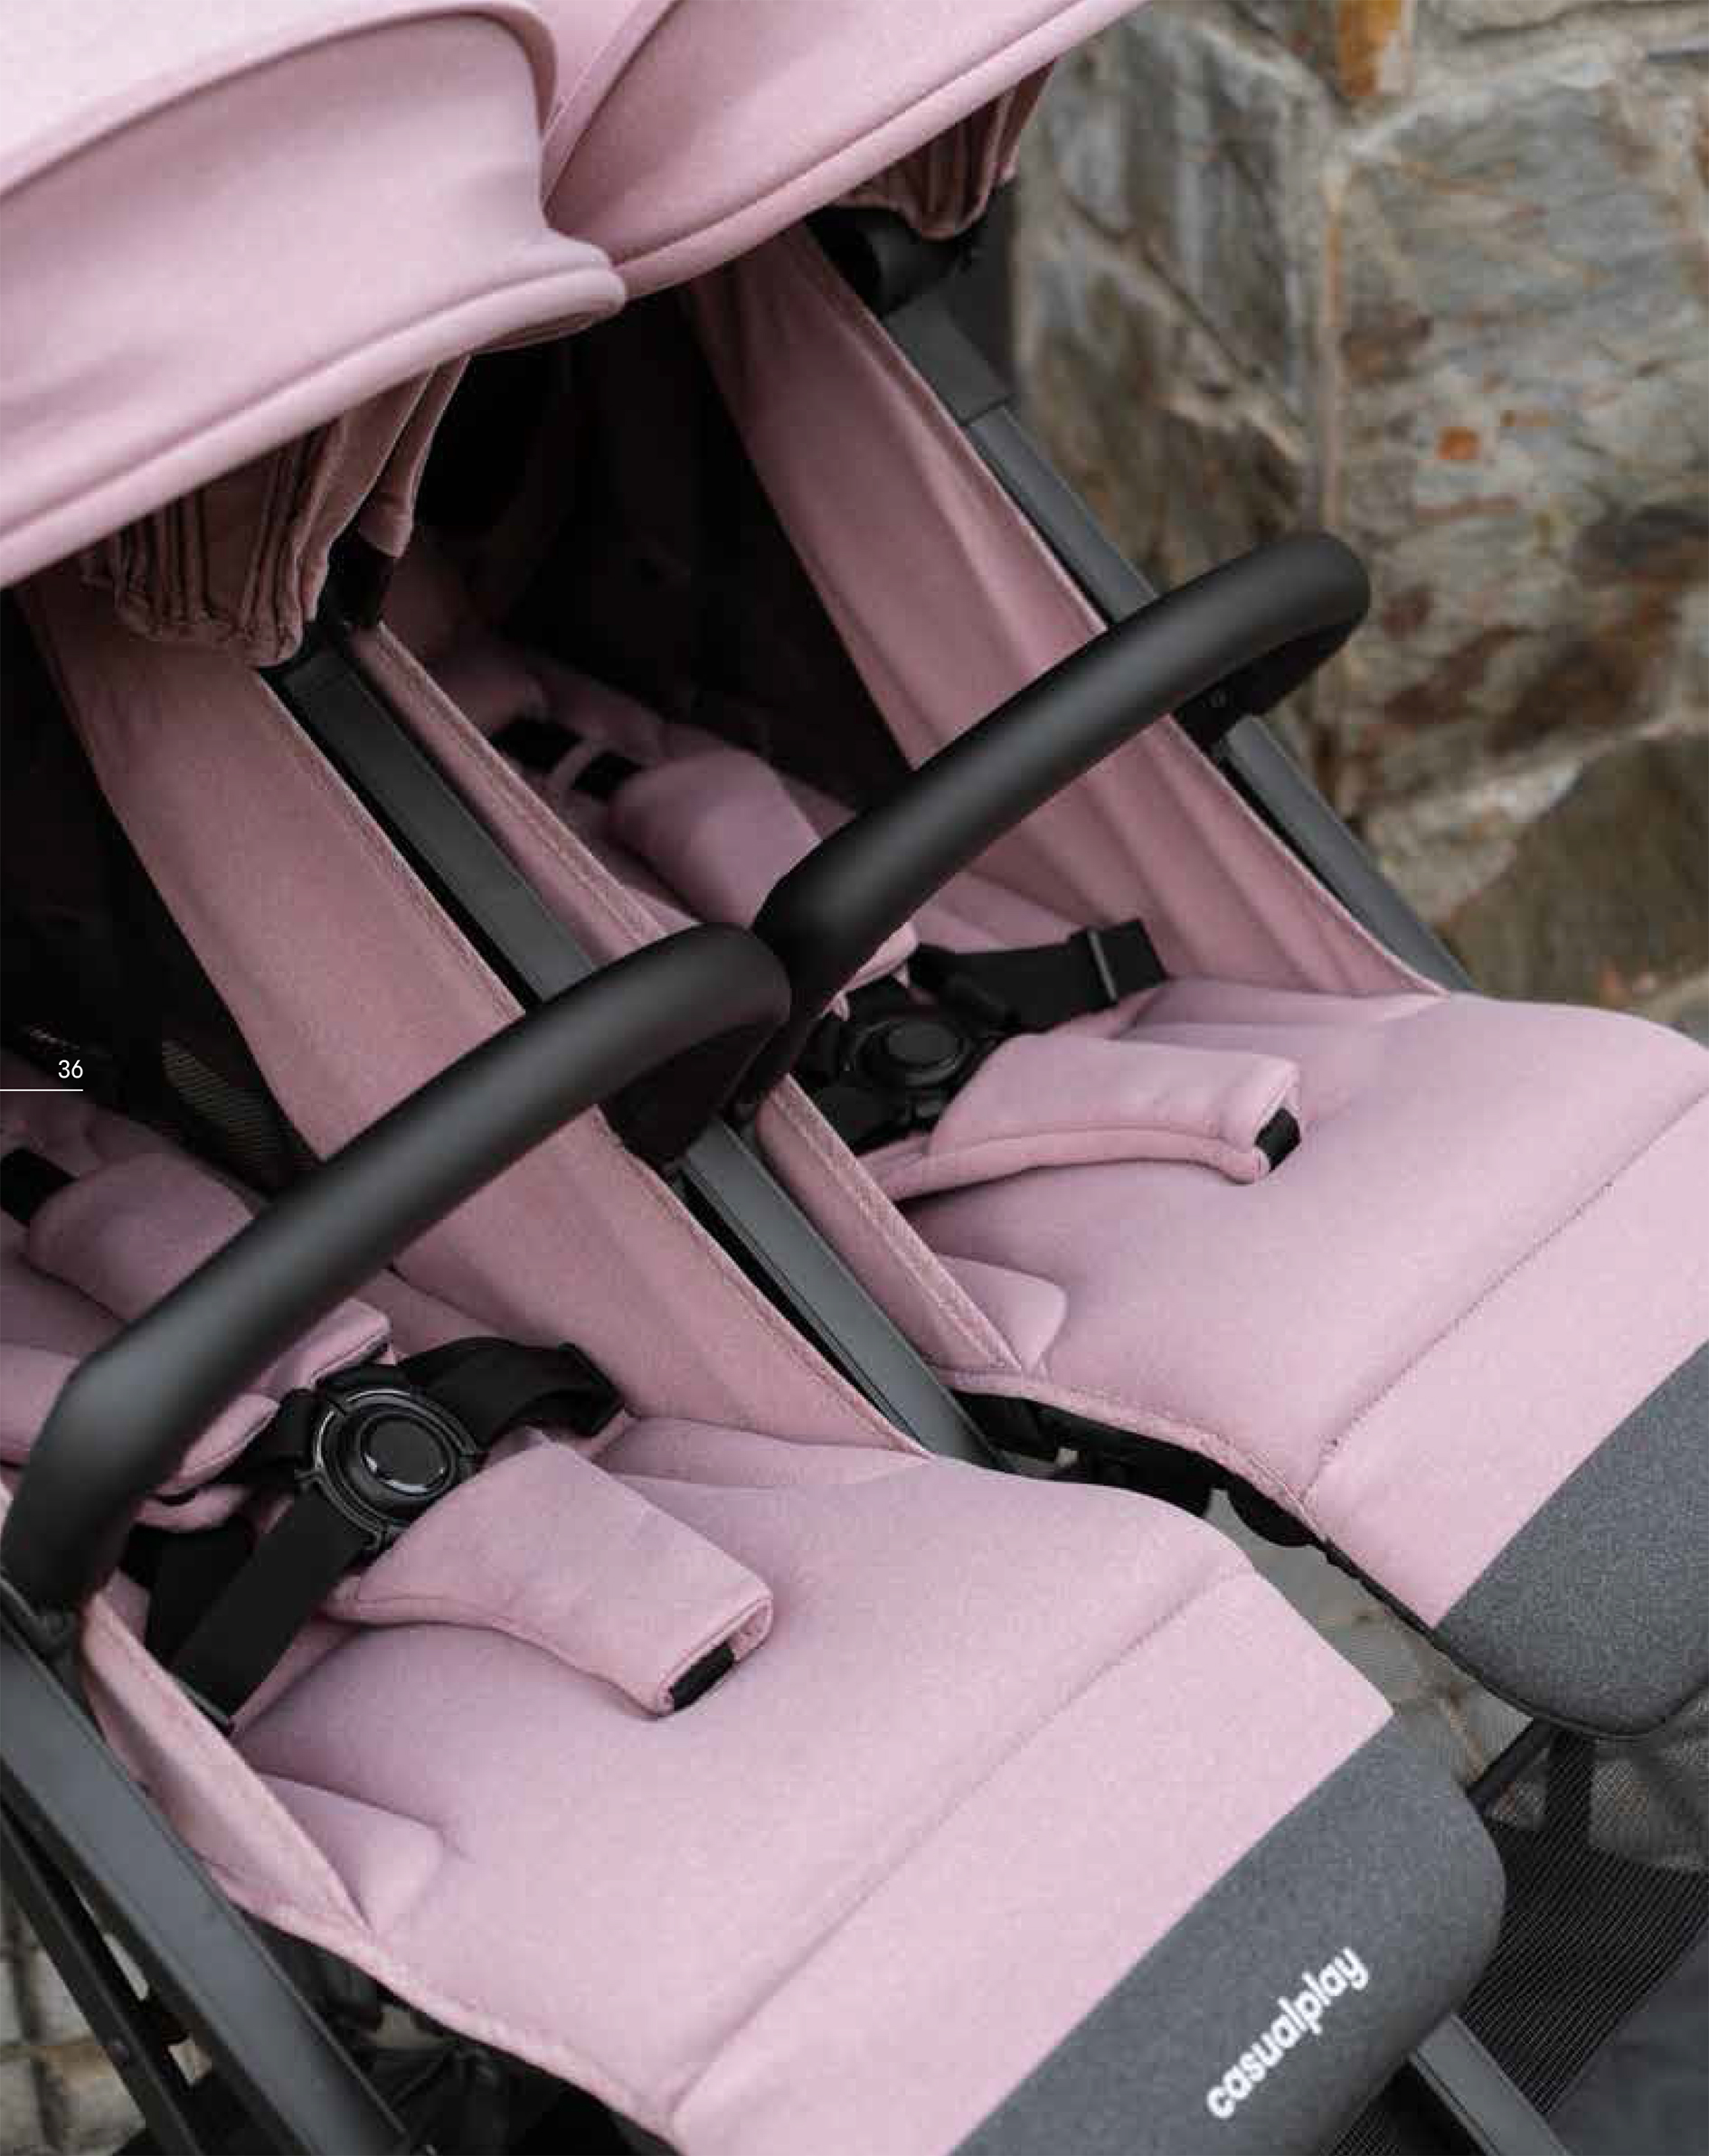 Coche gemelar TOUR TWIN MAX con 2 capazos MISTY PINK